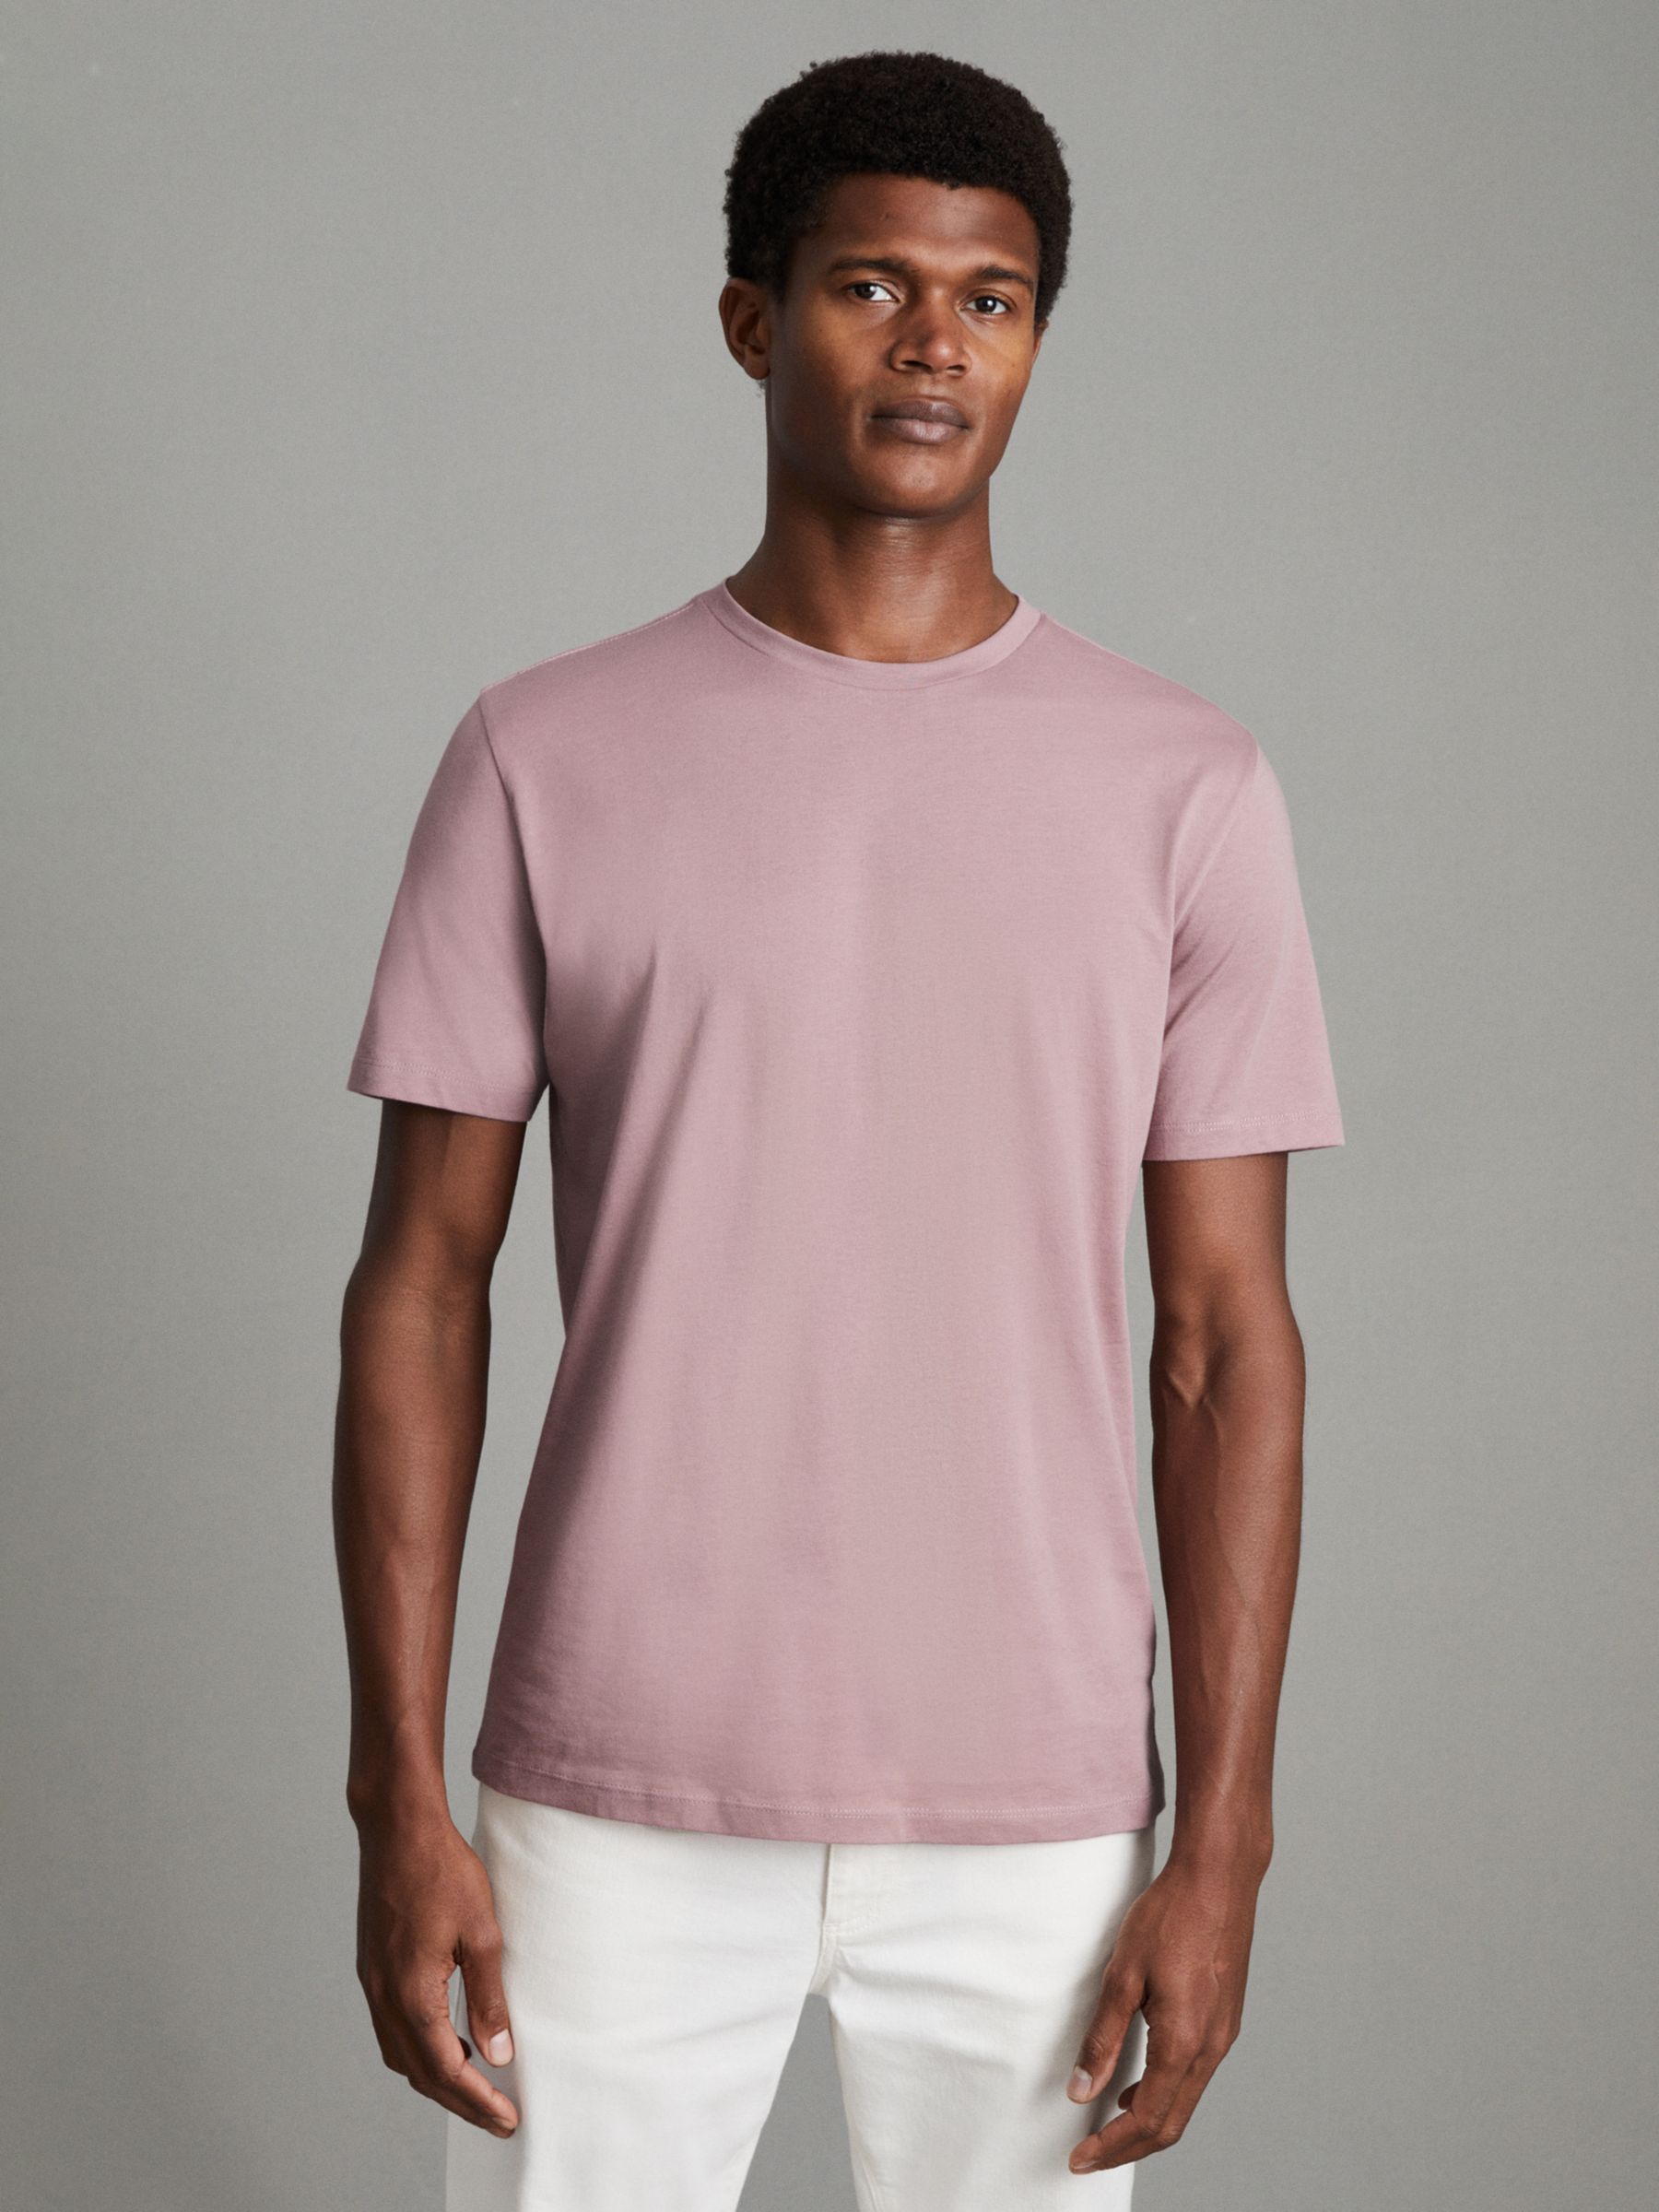 Reiss Bless Cotton Crew Neck T-Shirt, Dusty Rose at John Lewis & Partners